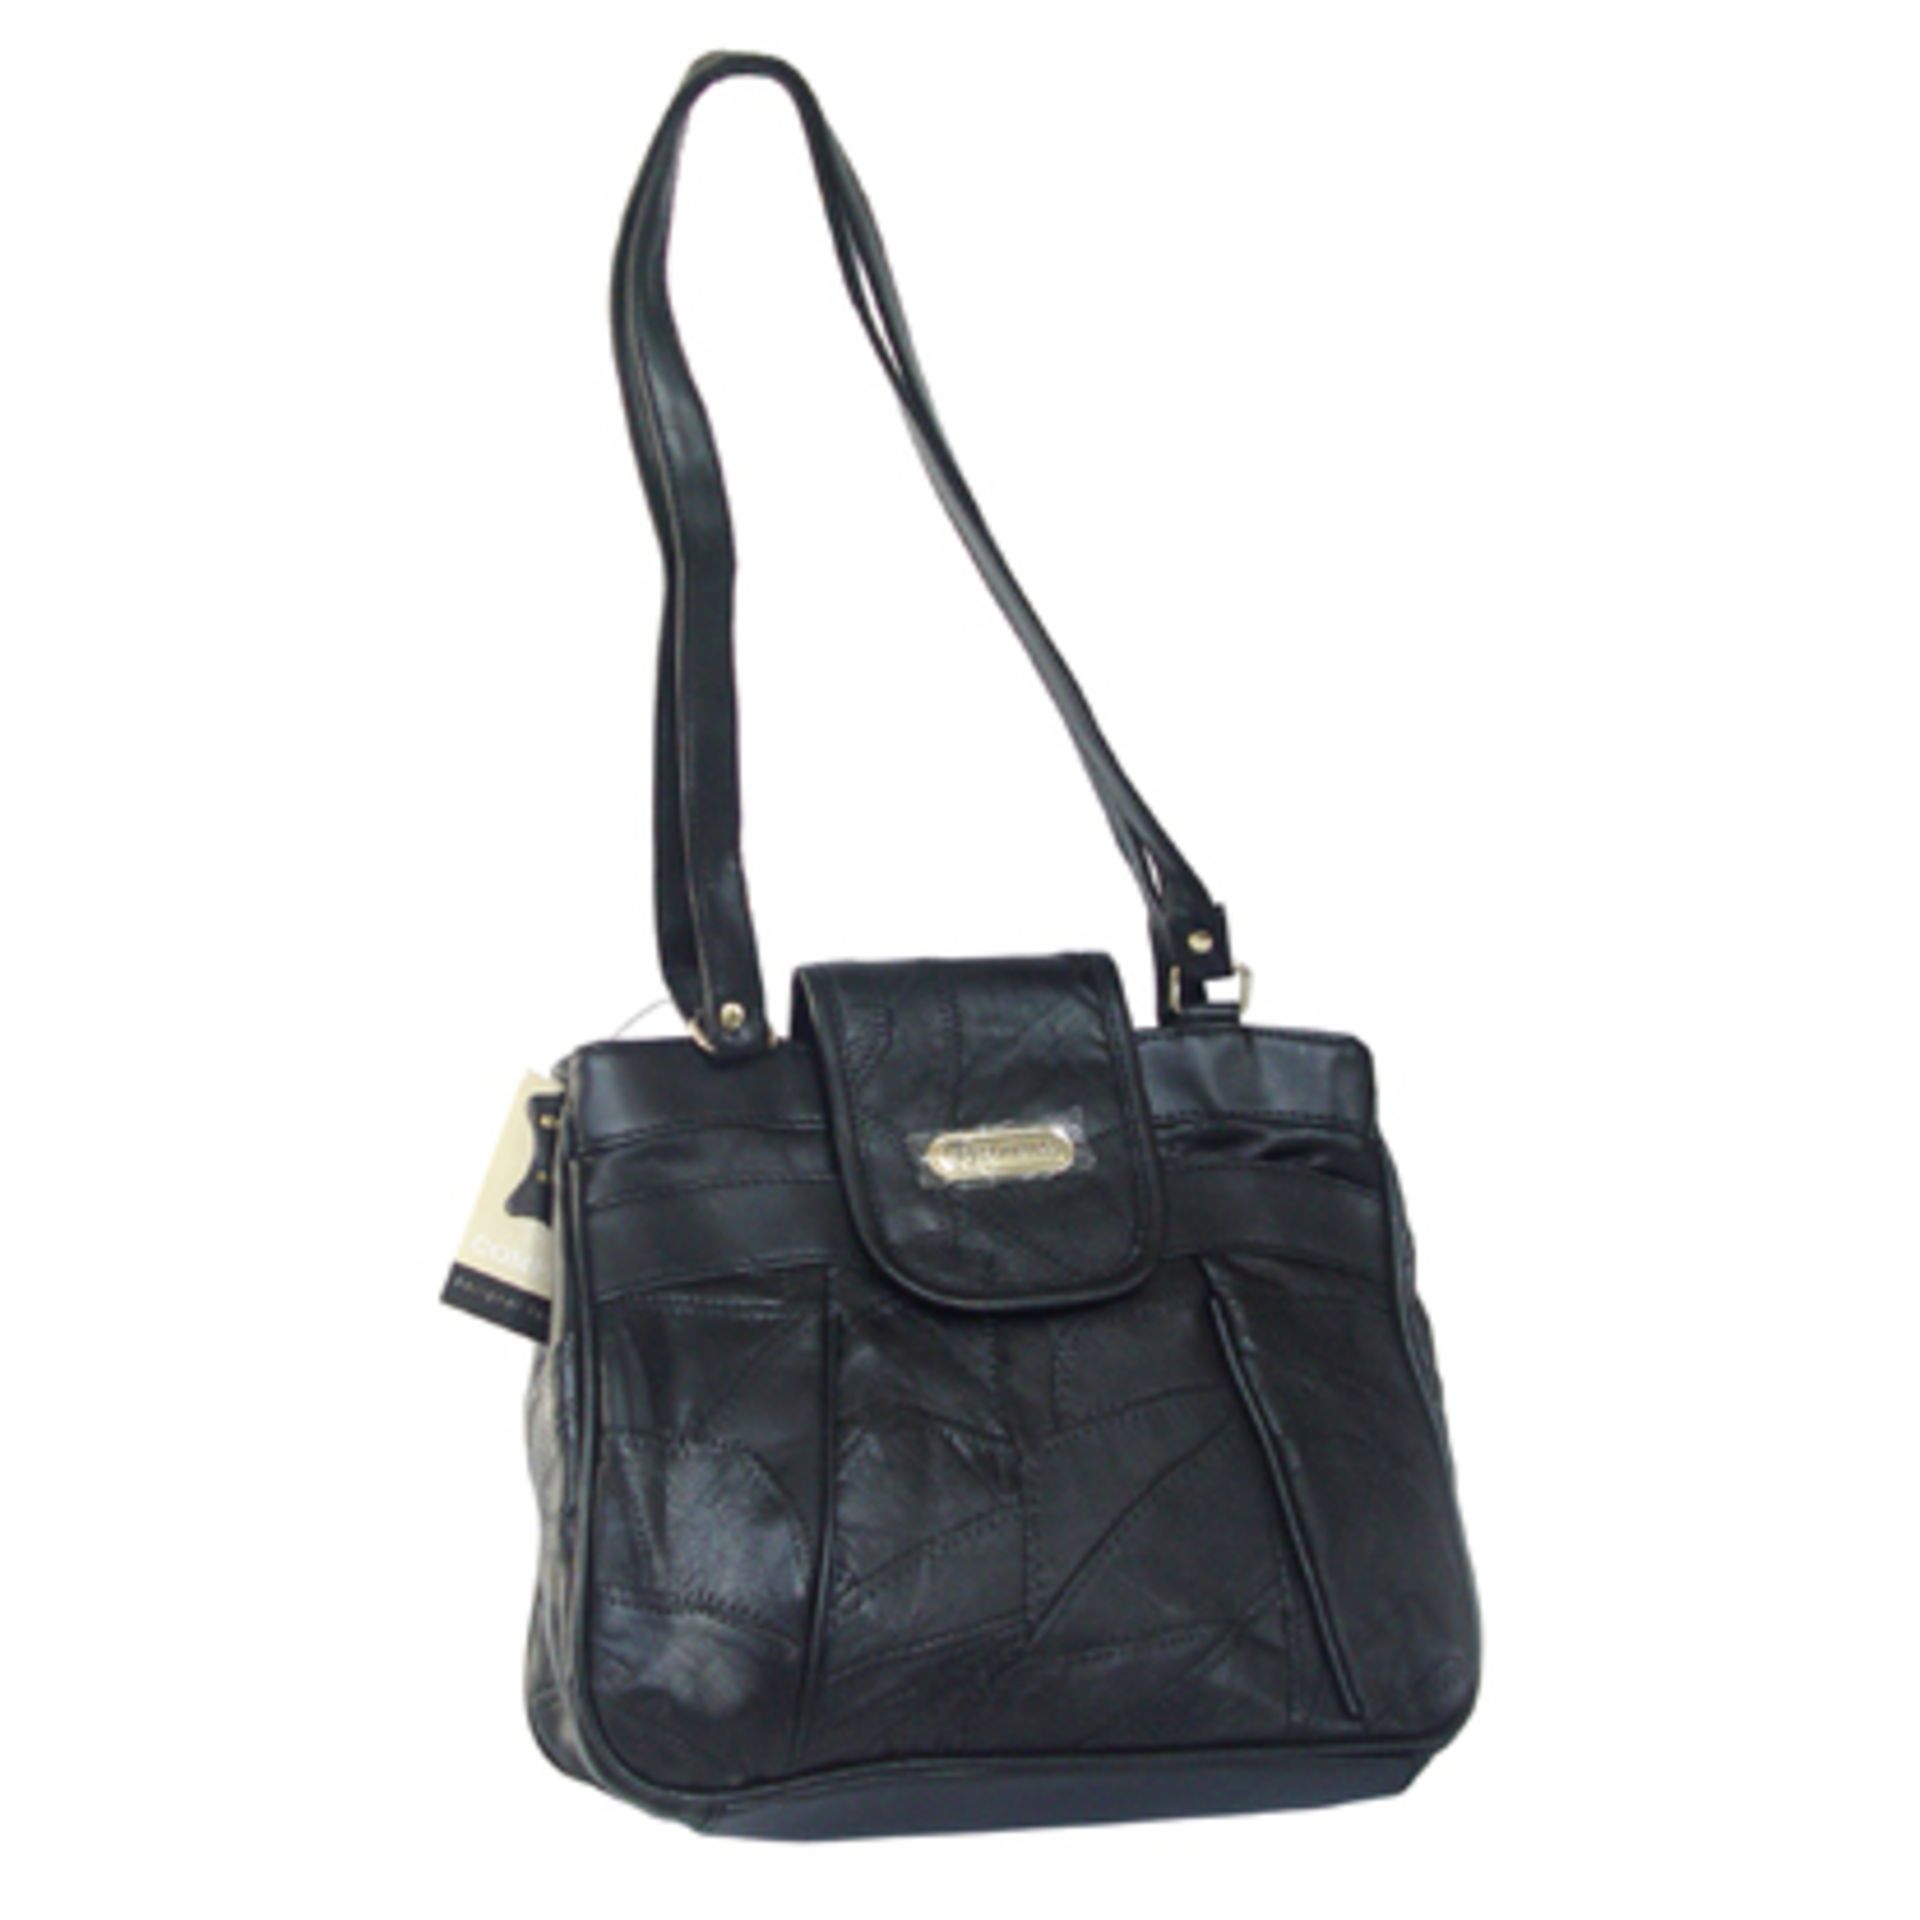 V Brand New Leather Ladies Black Handbag with shoulder strap X 2 YOUR BID PRICE TO BE MULTIPLIED